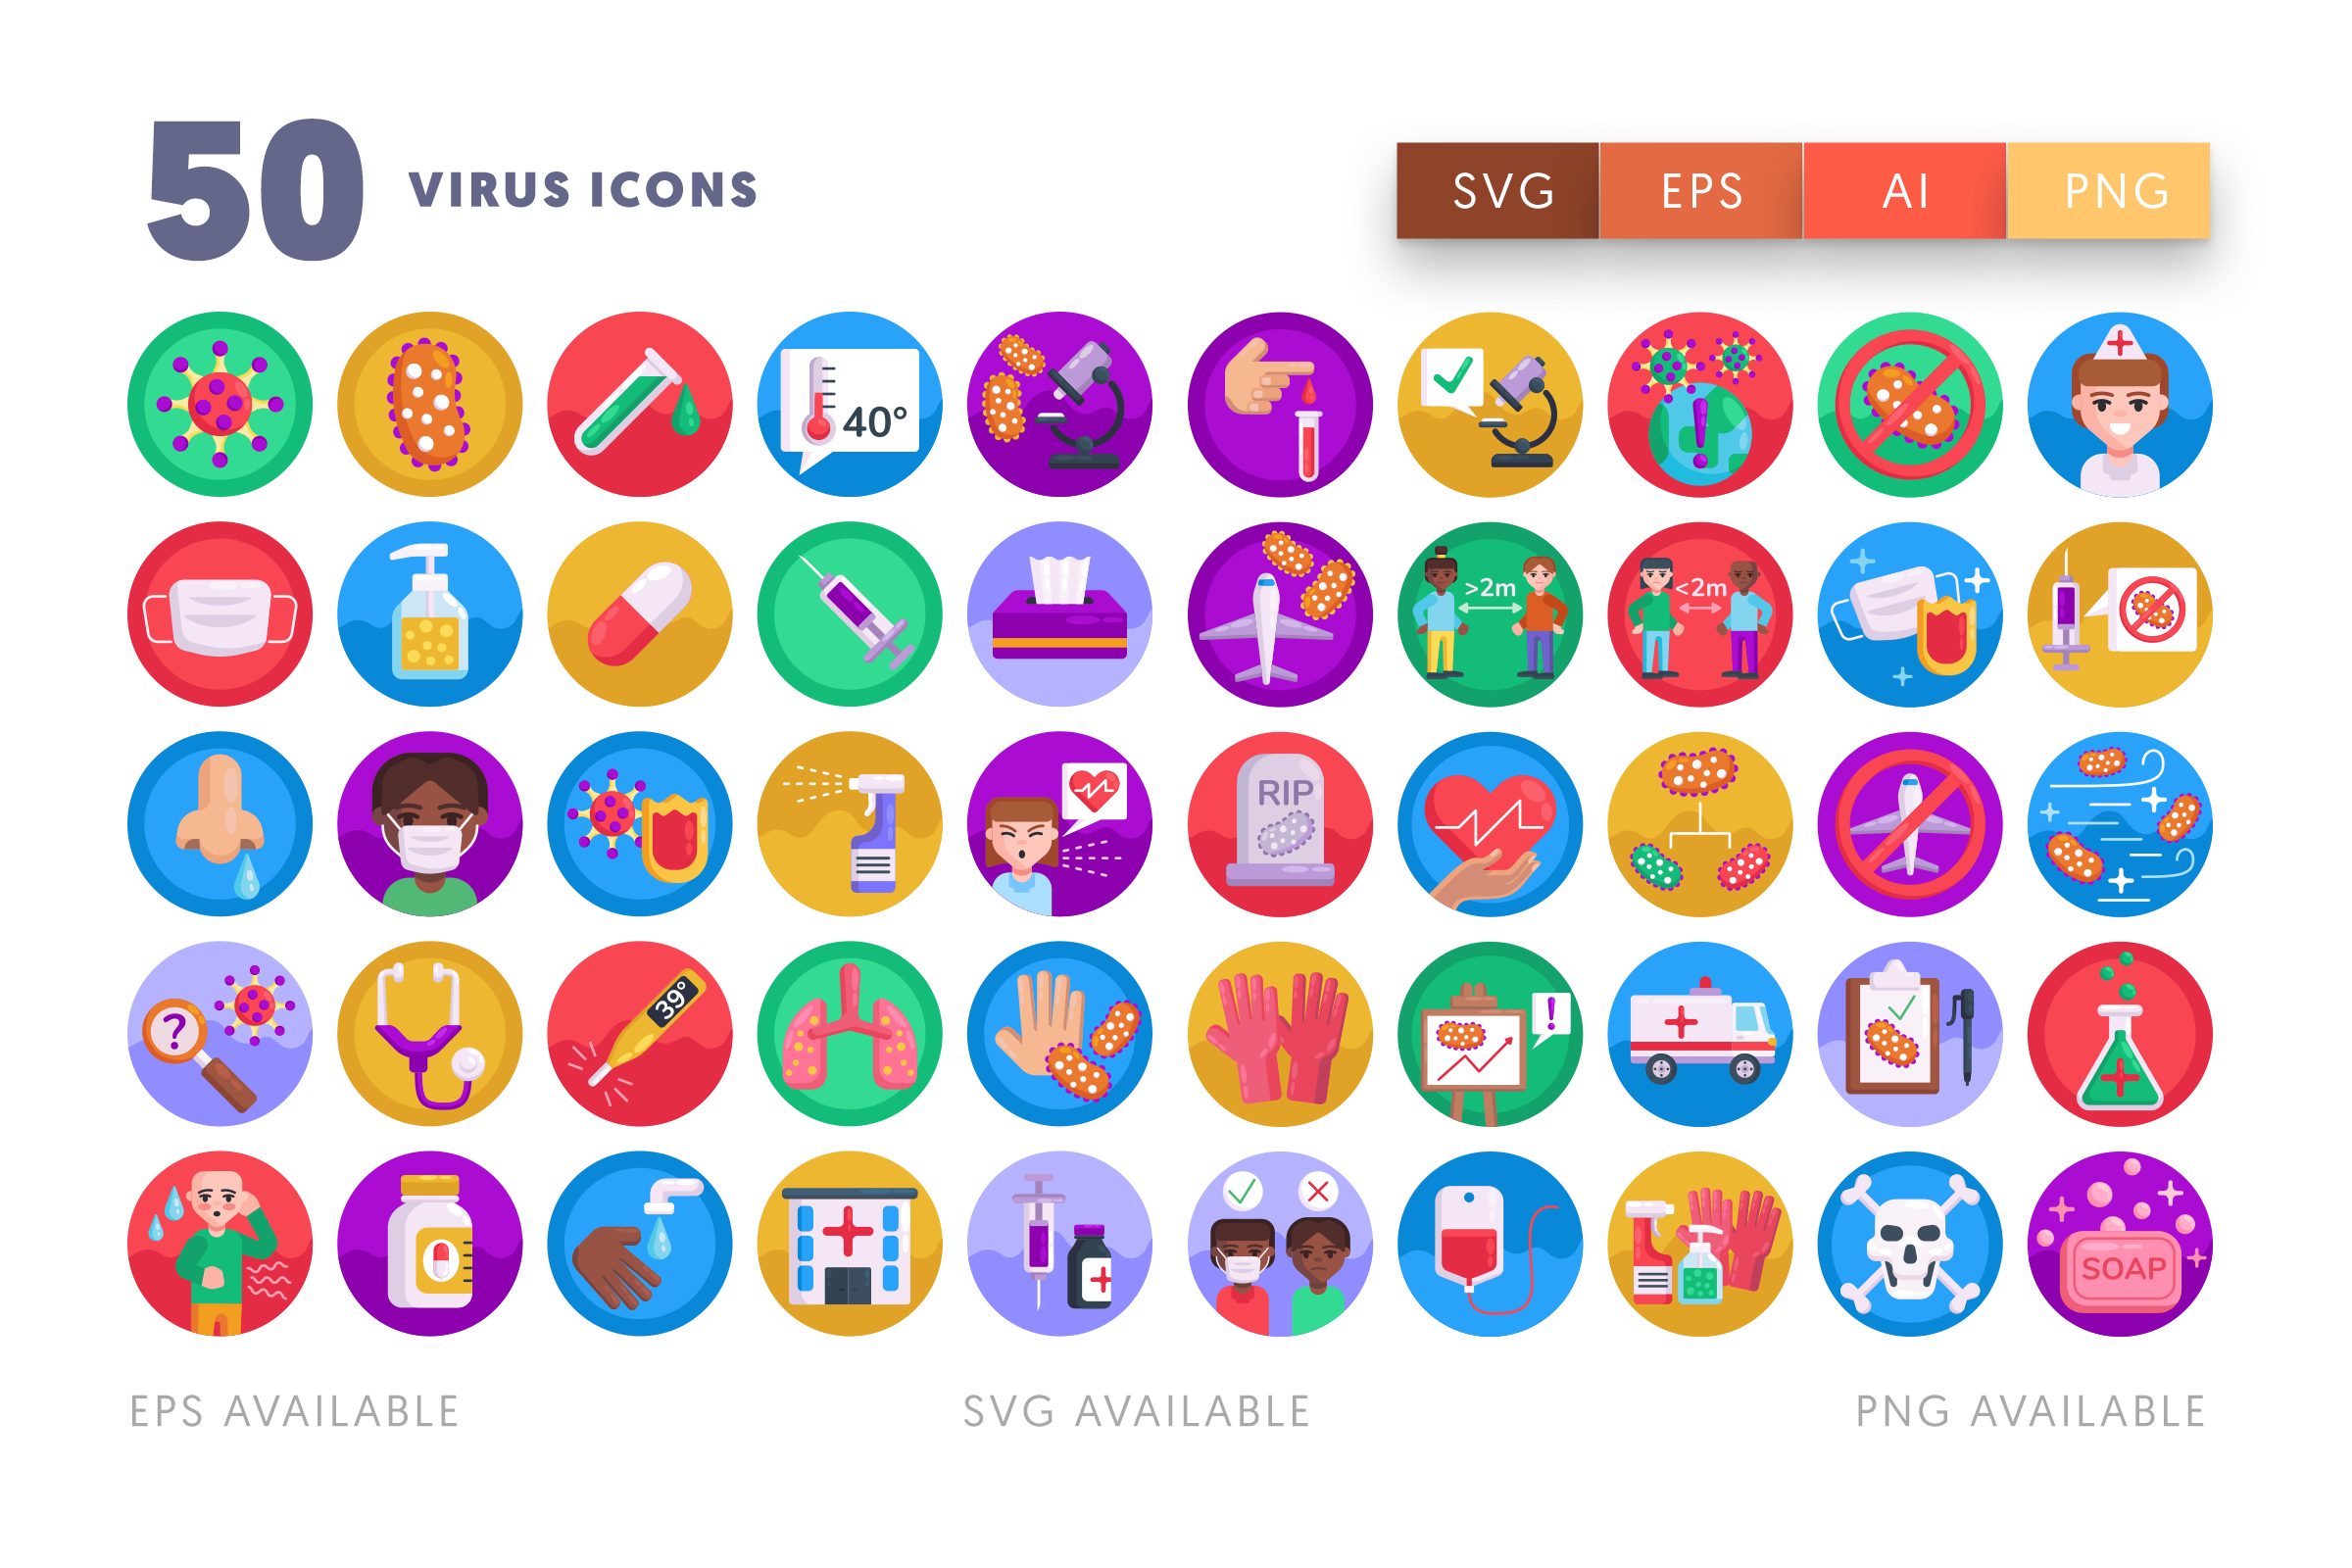 Virus icons png/svg/eps